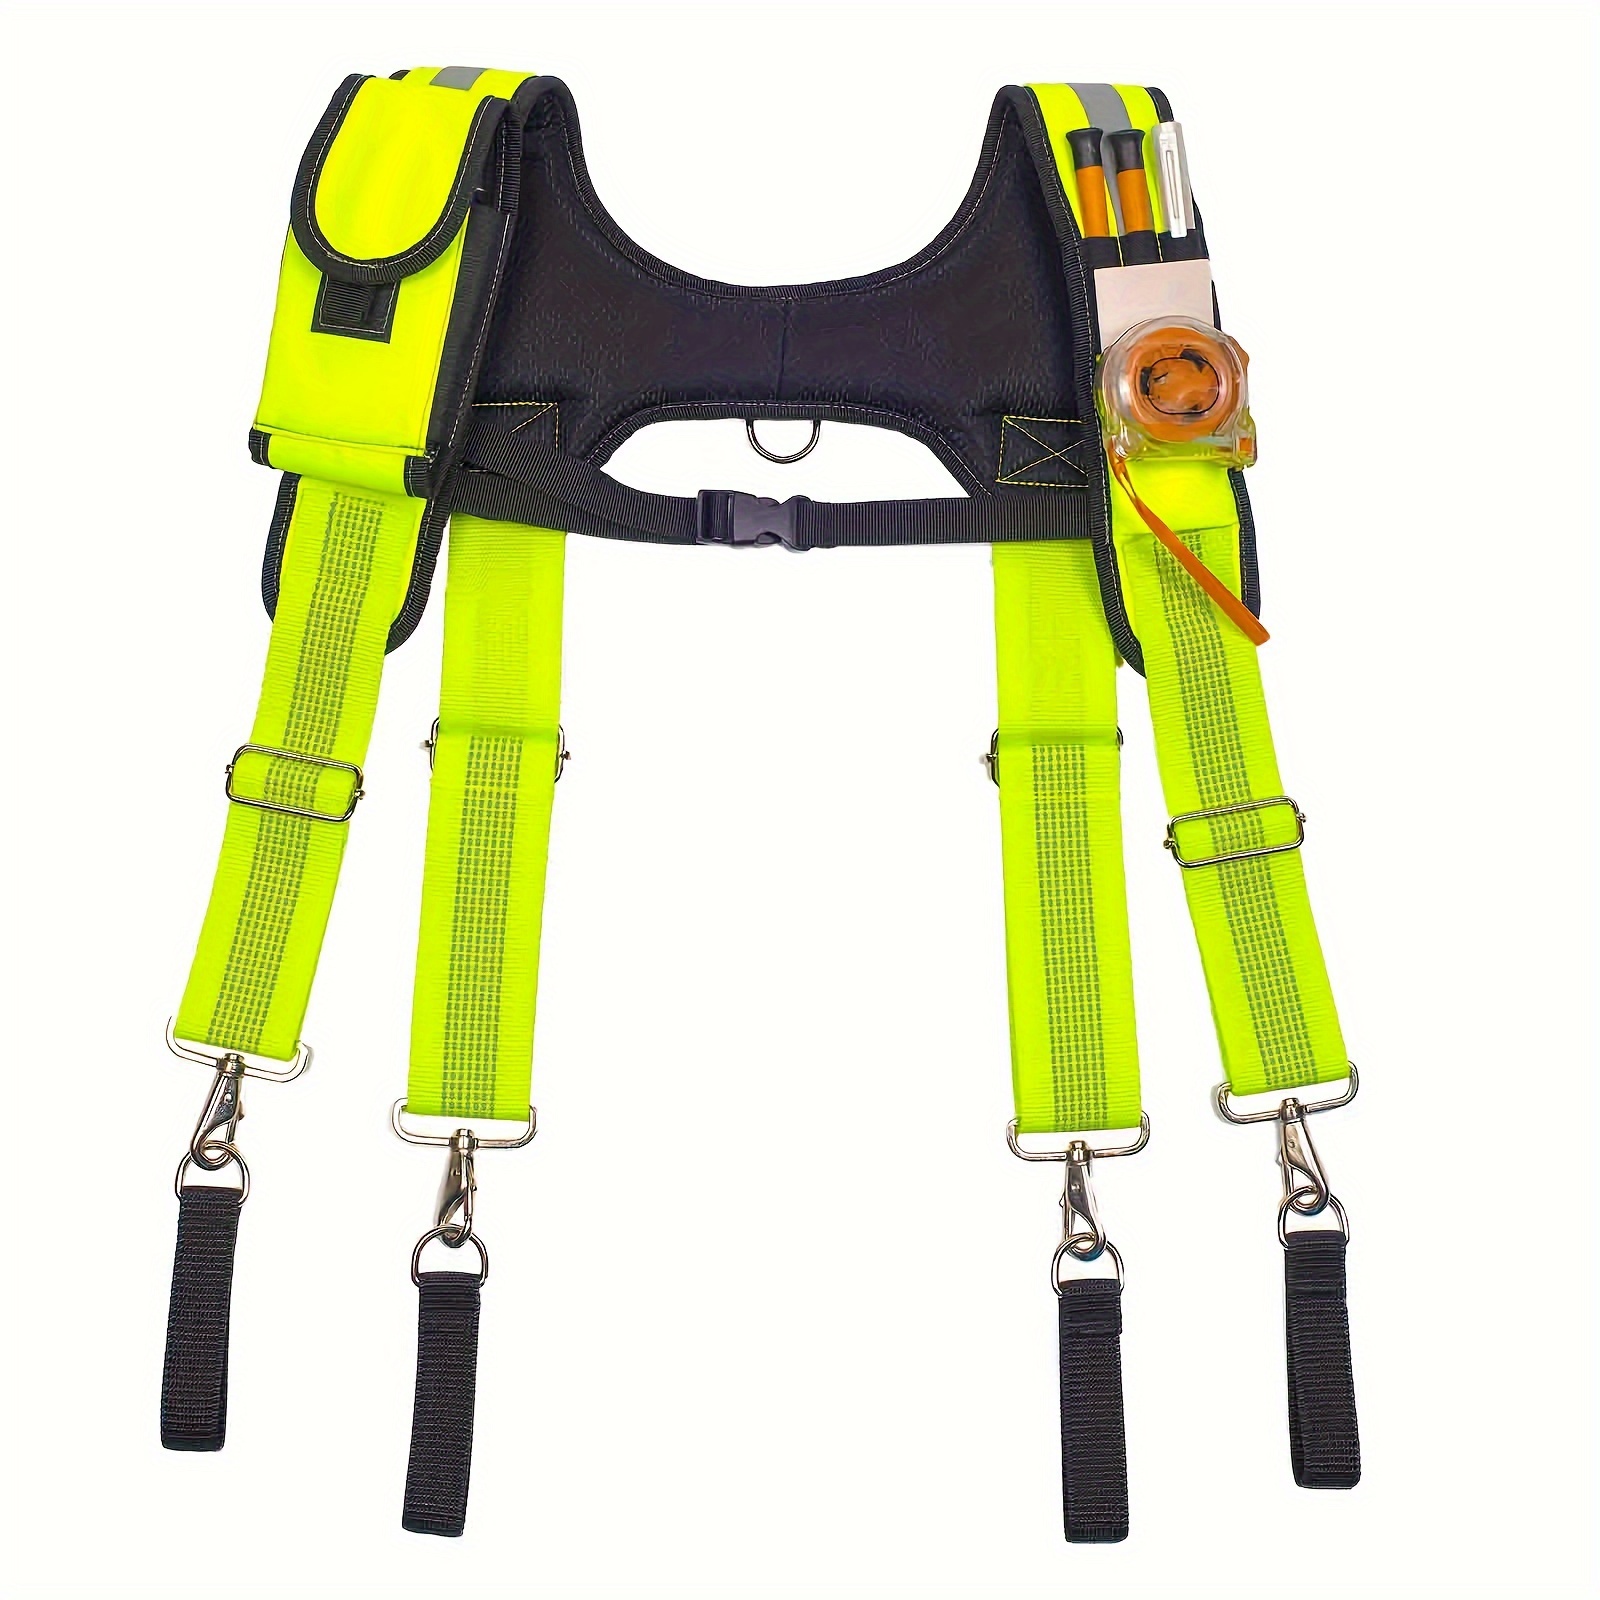 Tactical Suspenders Duty Belt Harness Padded Adjustable Tool Belt Suspenders  With Key Holder Ideal Choice For Gifts, Shop The Latest Trends